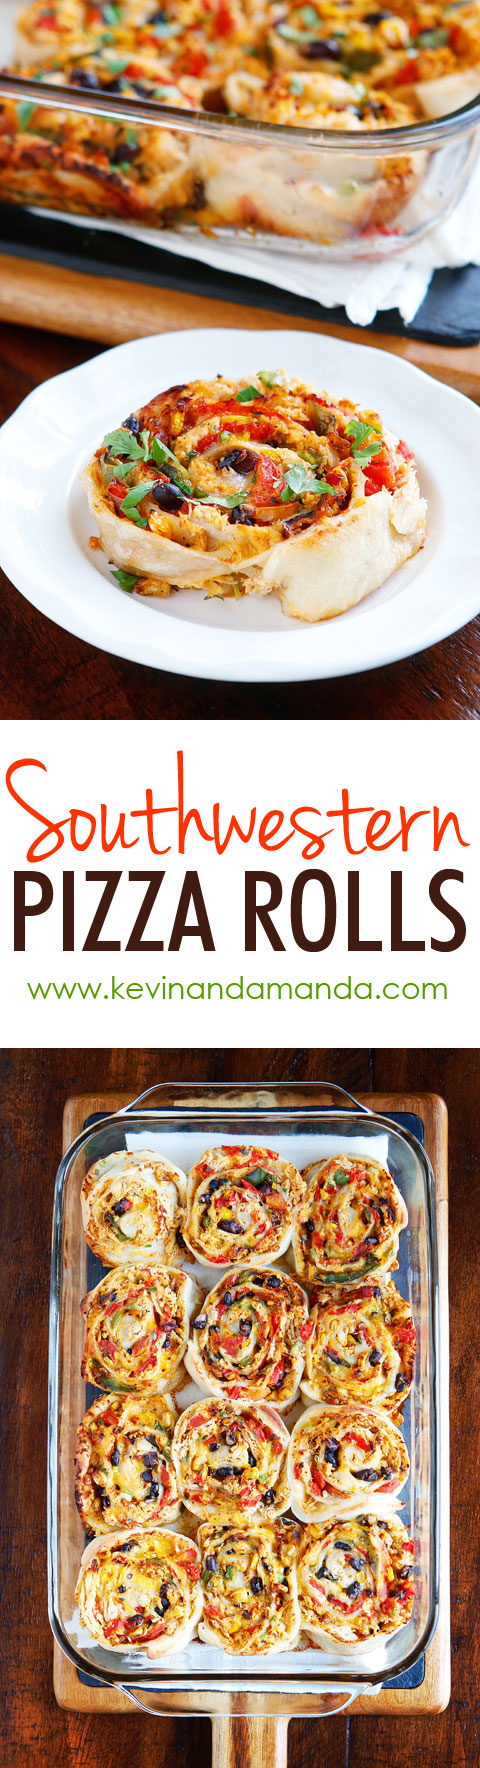 We cannot stop eating these Southwestern Chicken Pizza Rolls!! They are so good! They make me want to go back for seconds and thirds!